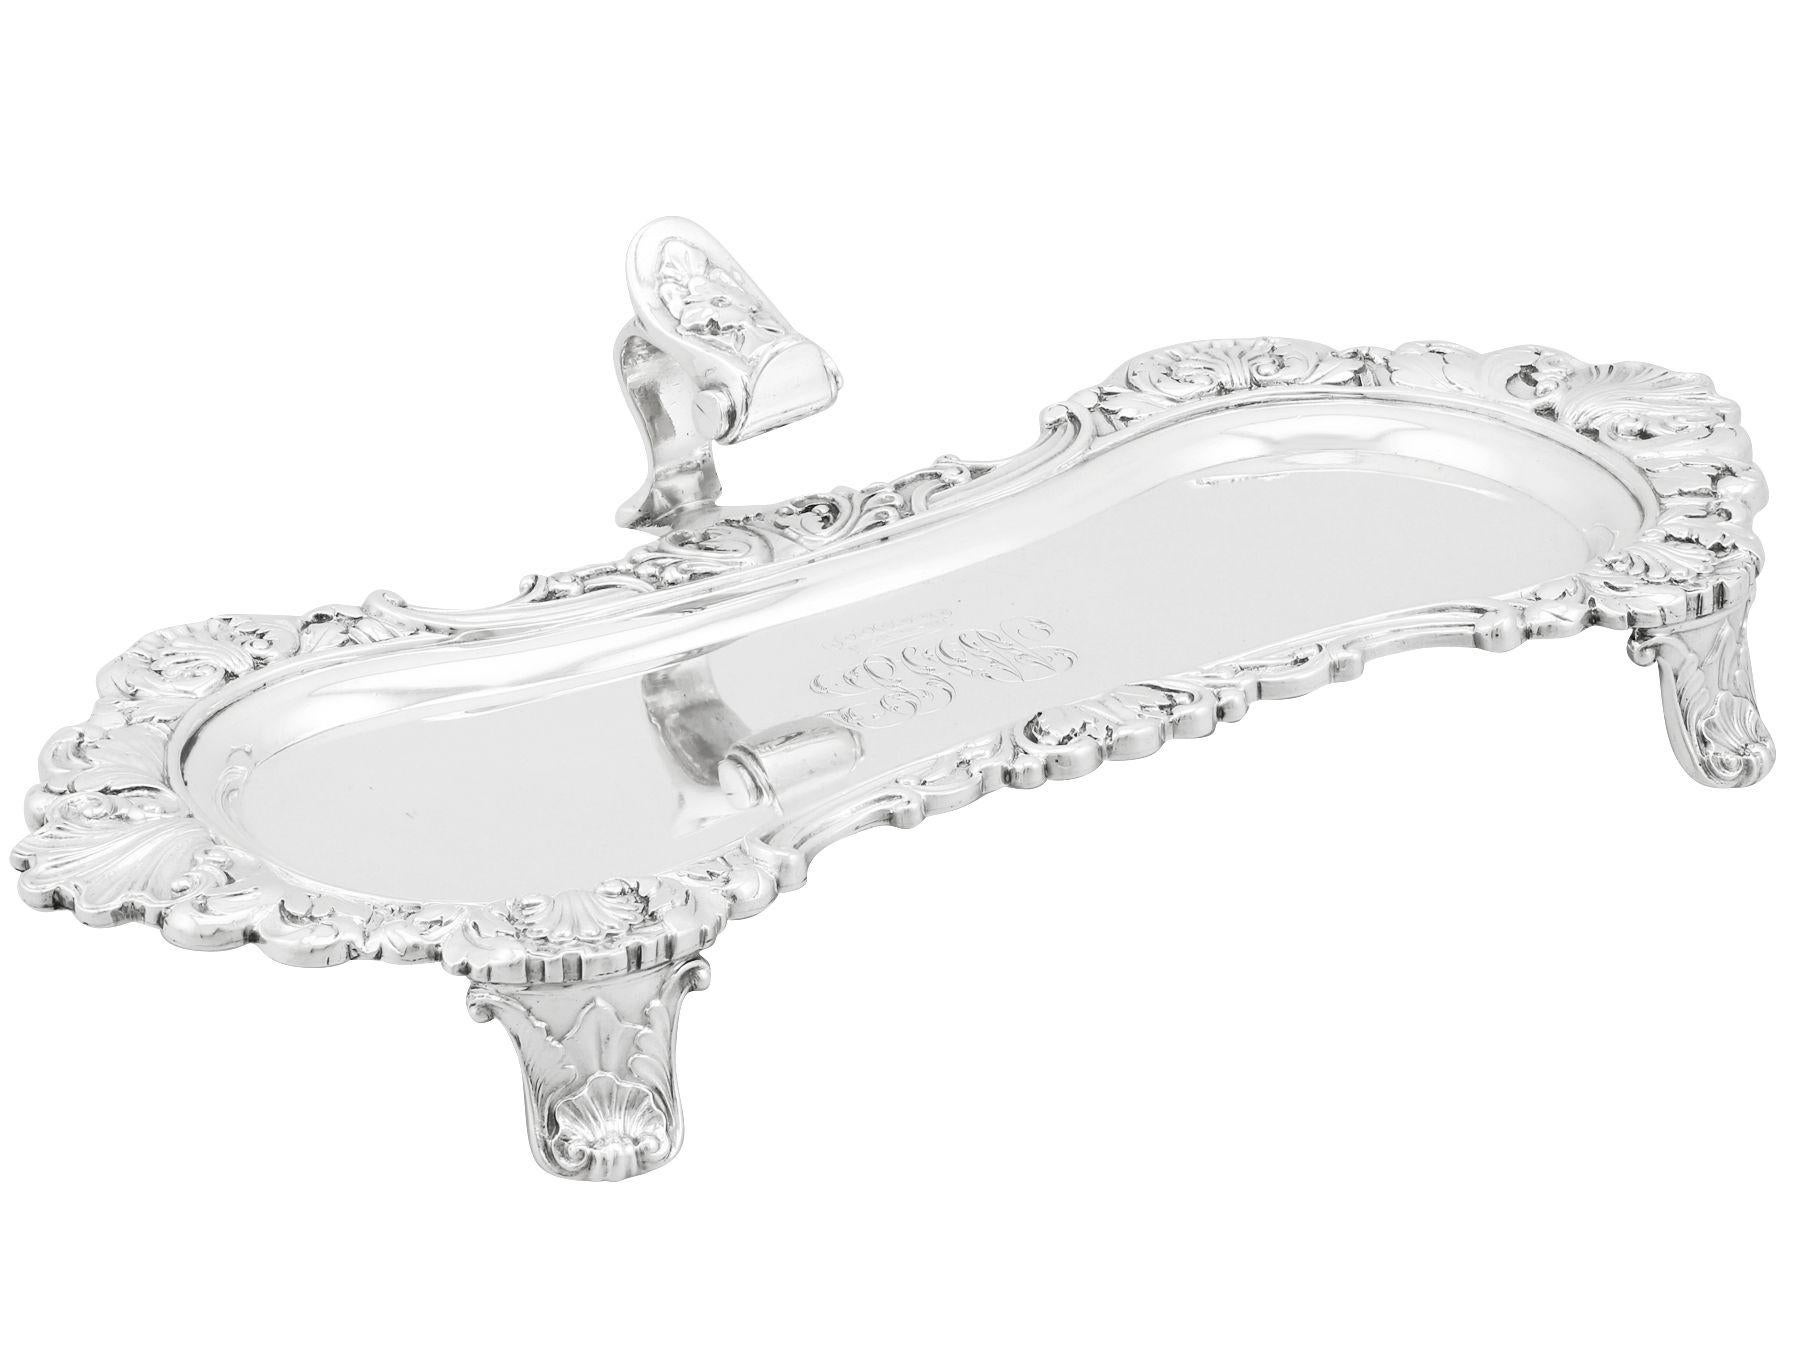 An exceptional, fine and impressive antique George IV English sterling silver snuffer tray; an addition to our antique silverware collection.

This exceptional antique George IV sterling silver snuffer tray has an oval, serpentine shaped